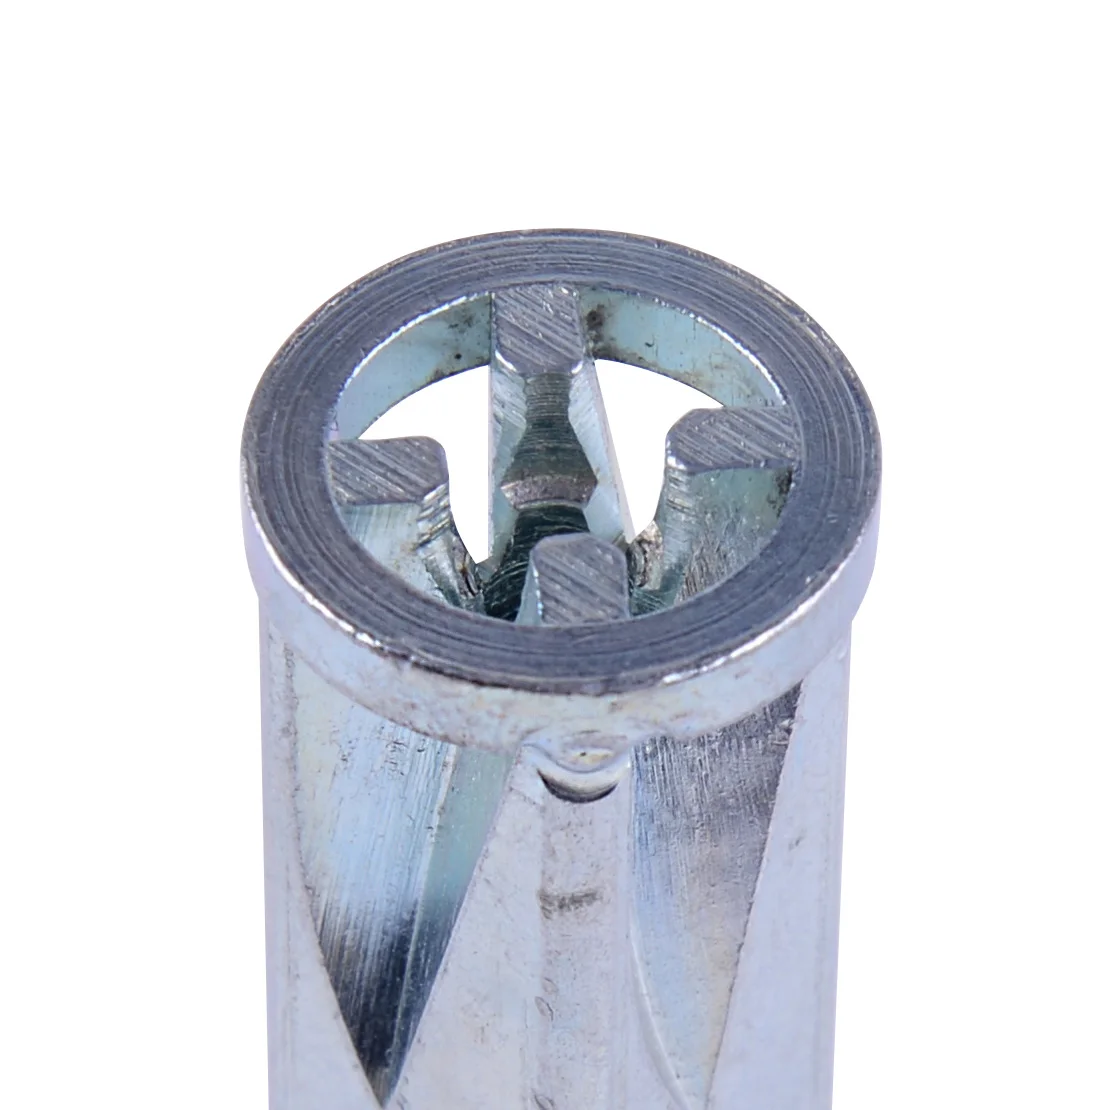 LETAOSK Universal 2.5/4 Square Cable Wire Stripping Steel And Twisting Quick Connector Tool